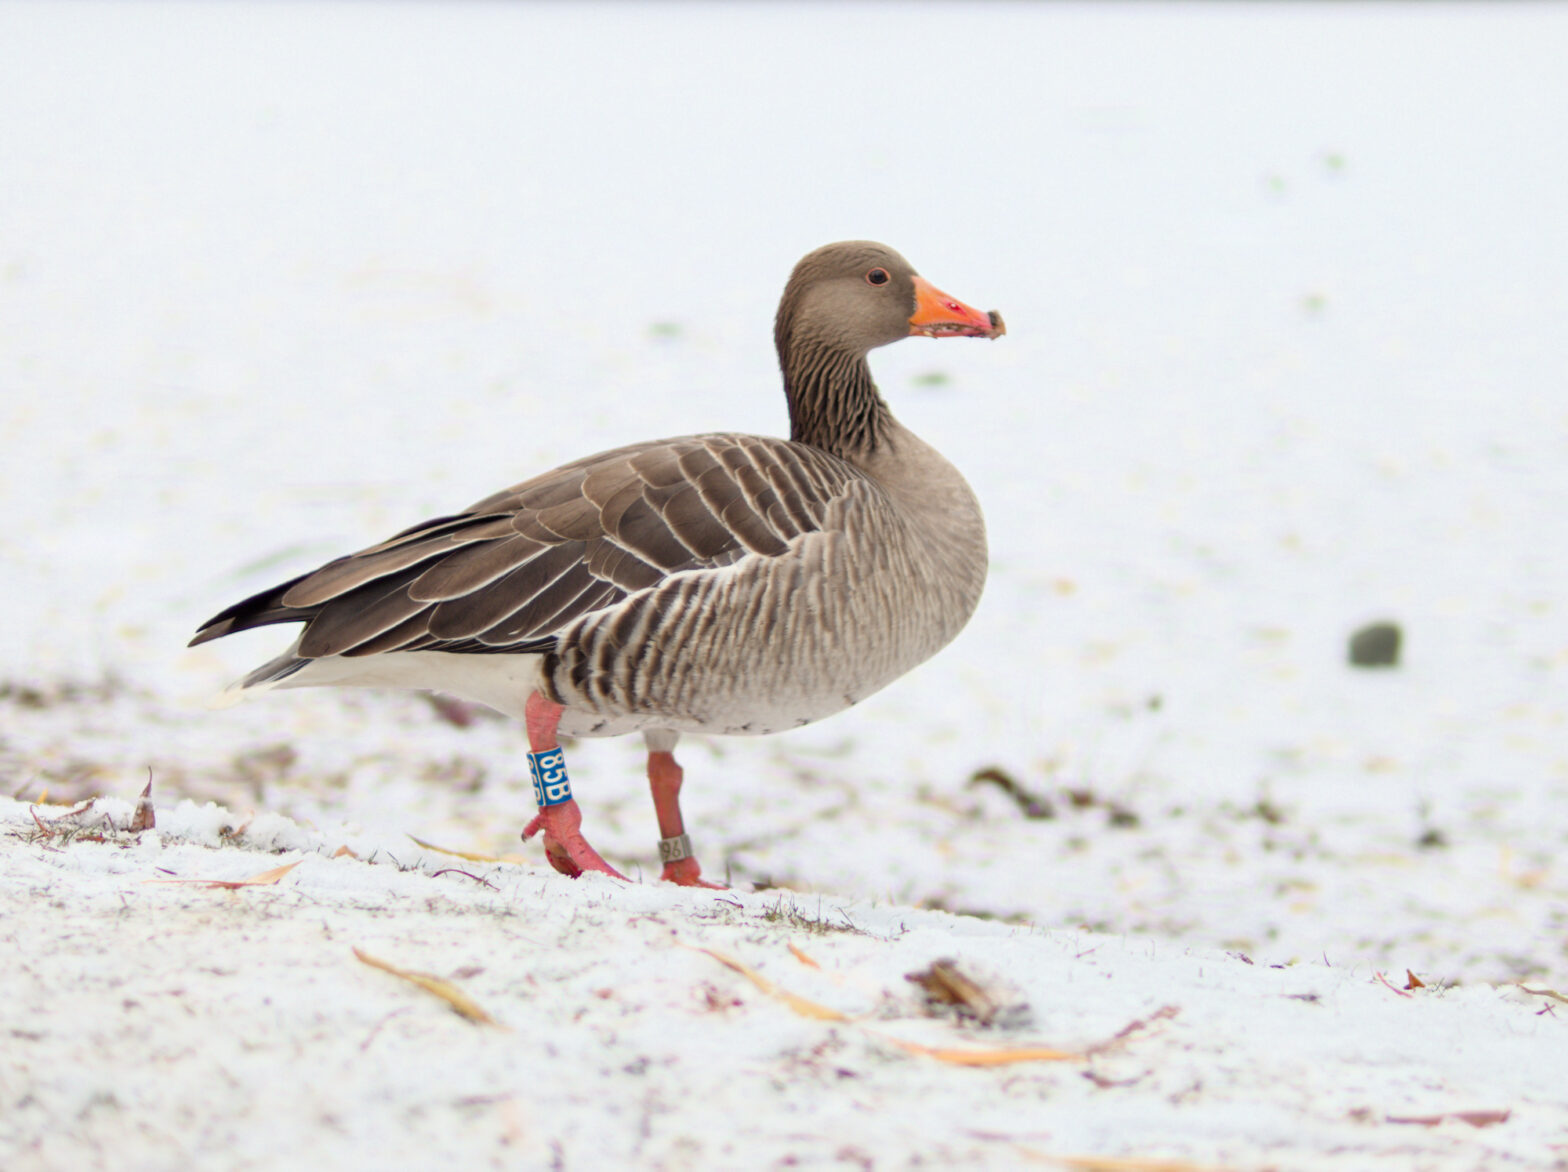 A greylag goose with a blue leg ring reading "85B" stands in the snow, facing right